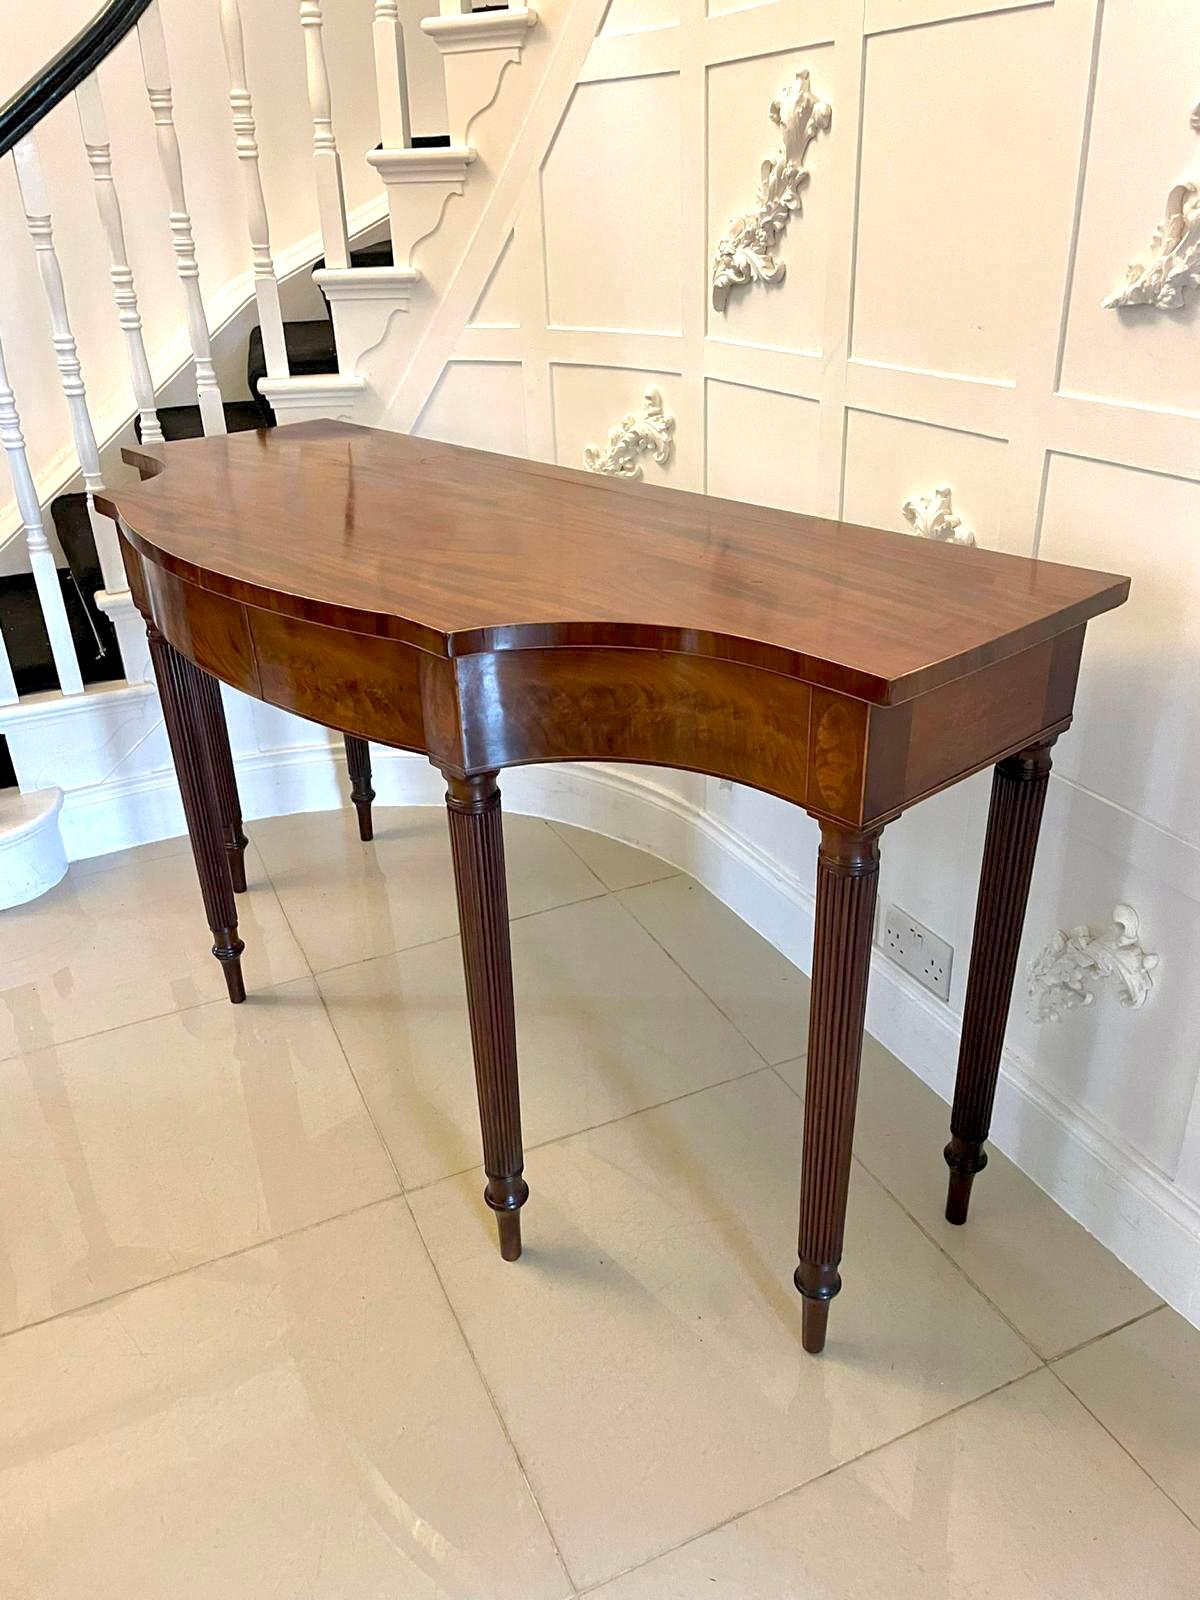 Outstanding quality antique George III figured mahogany serpentine shaped serving/console table having an outstanding quality figured mahogany serpentine shaped top with satinwood inlay stringing to the edge above a figured mahogany serpentine shape